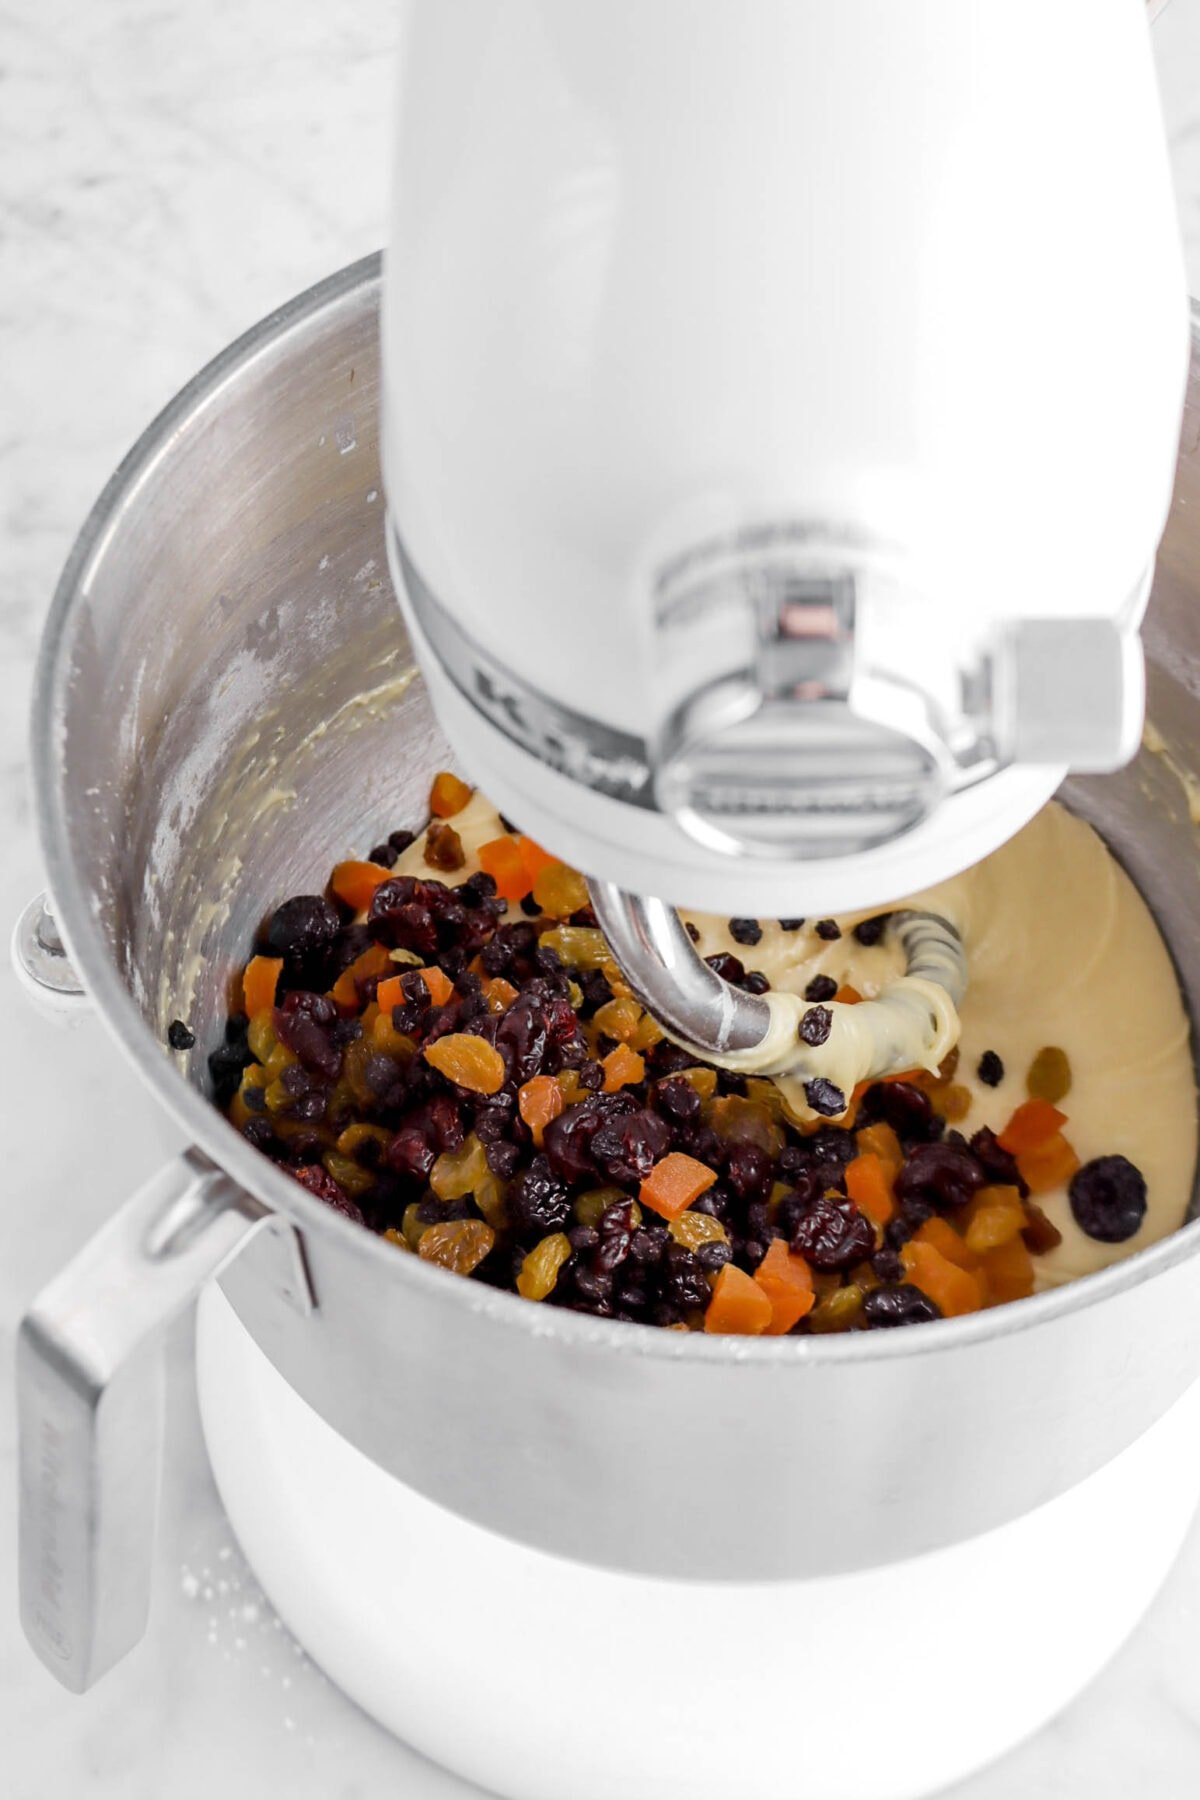 dried fruit mixture added to mixer bowl with smooth dough.